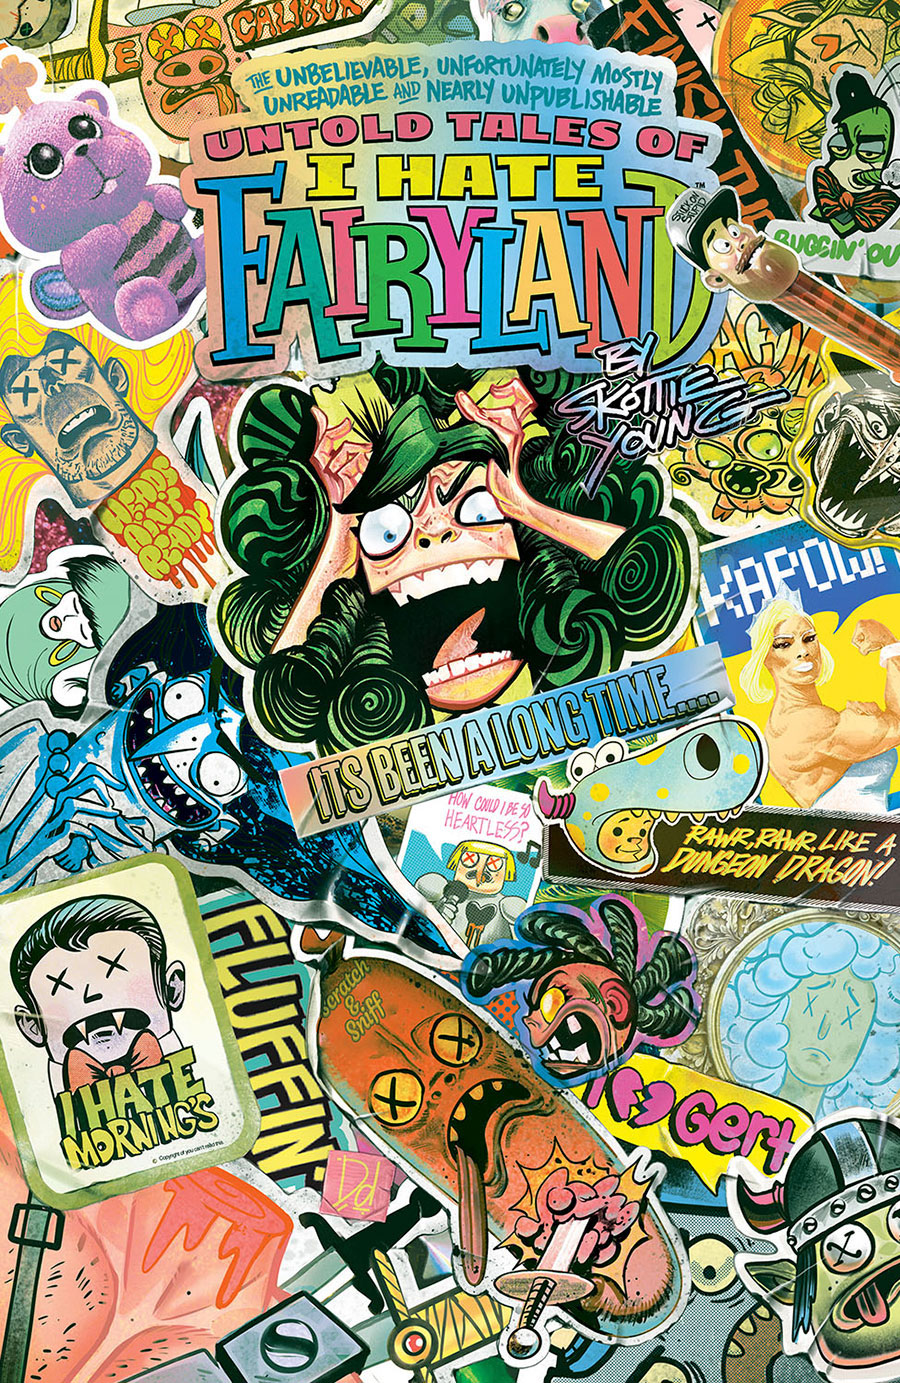 Unbelievable Unfortunately Mostly Unreadable And Nearly Unpublishable Untold Tales Of I Hate Fairyland TP